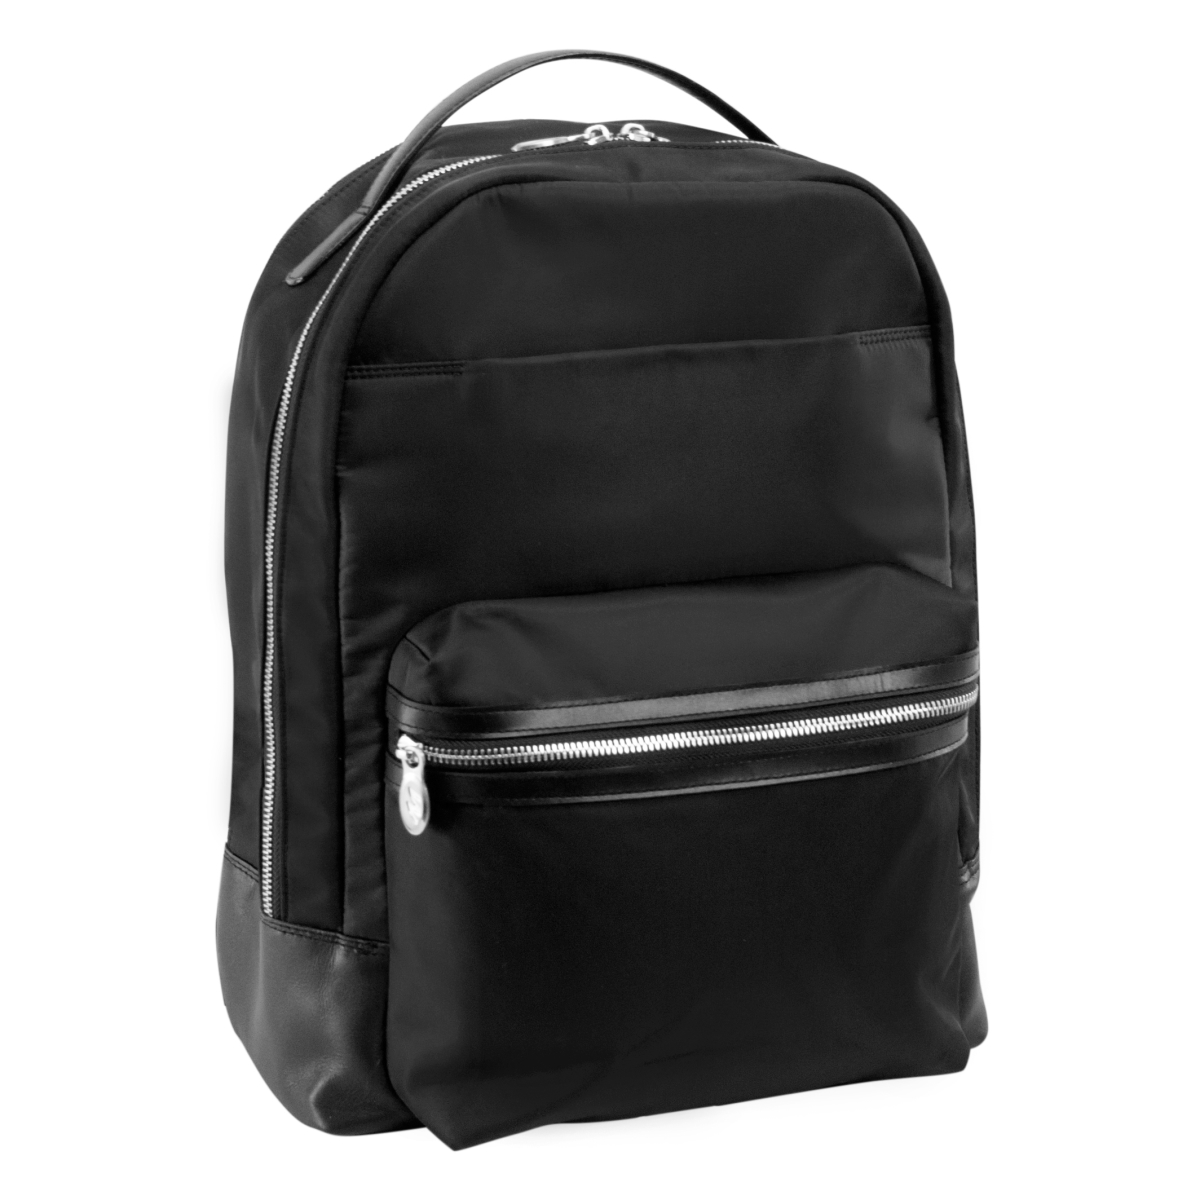 Mcklein Usa 18555 15 In. Parker Nylon Dual Compartment Laptop Backpack, Black